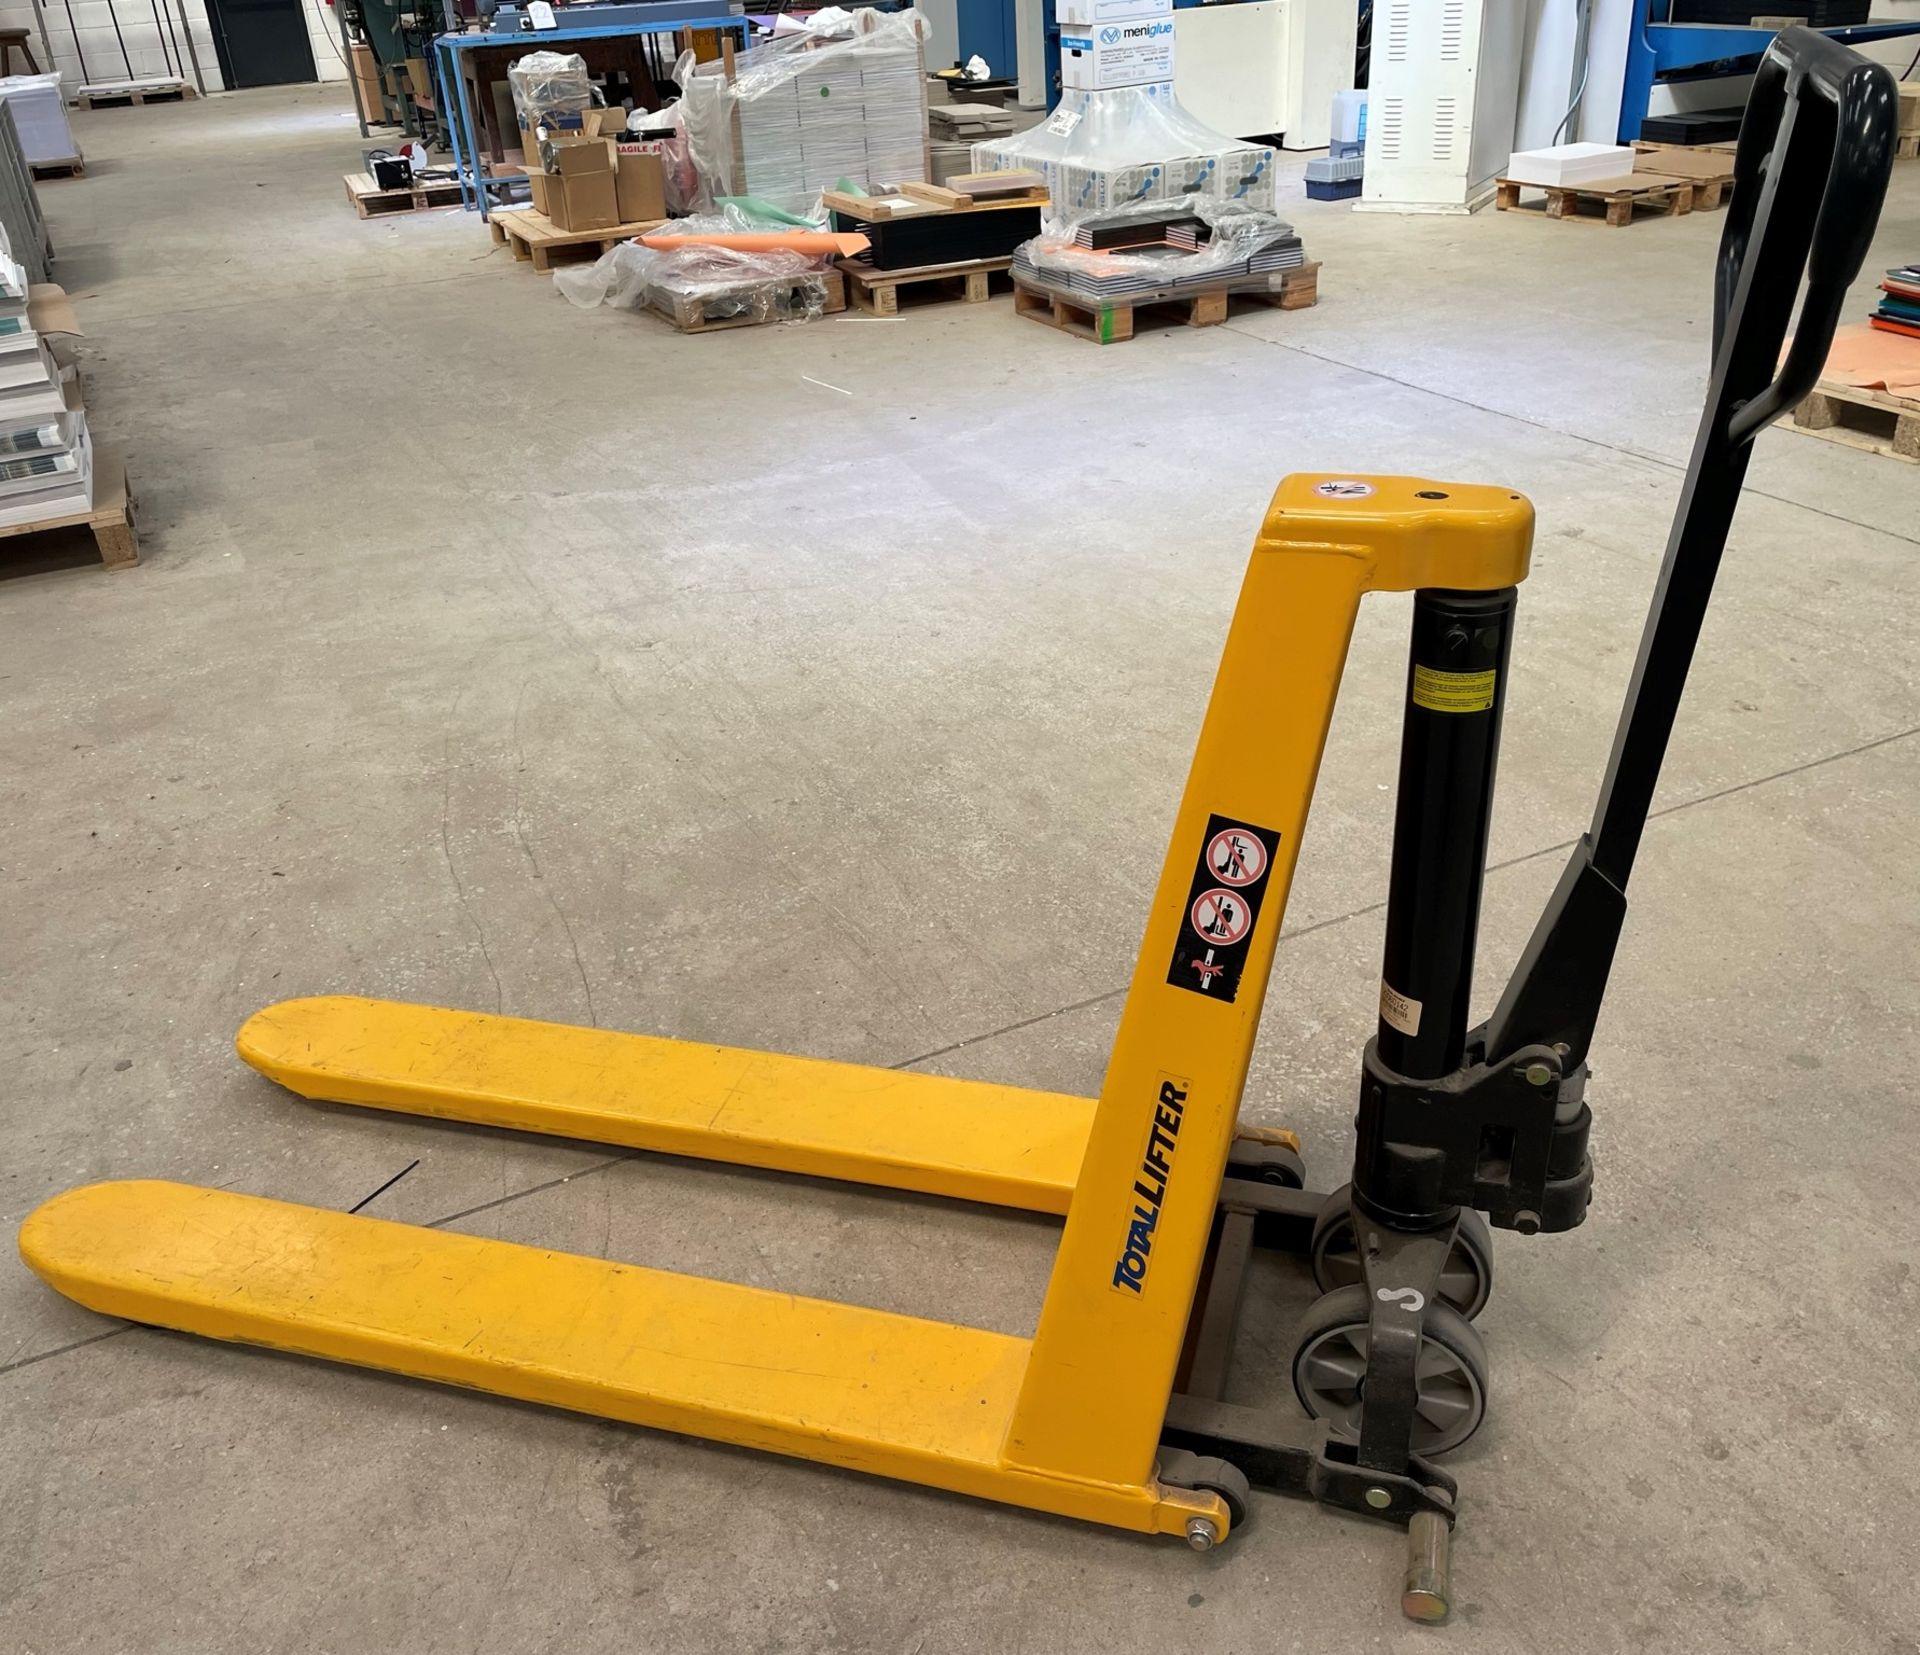 Total Lifter ACX10M High Lift Pallet Truck - 1,000kg Capacity - Image 4 of 4